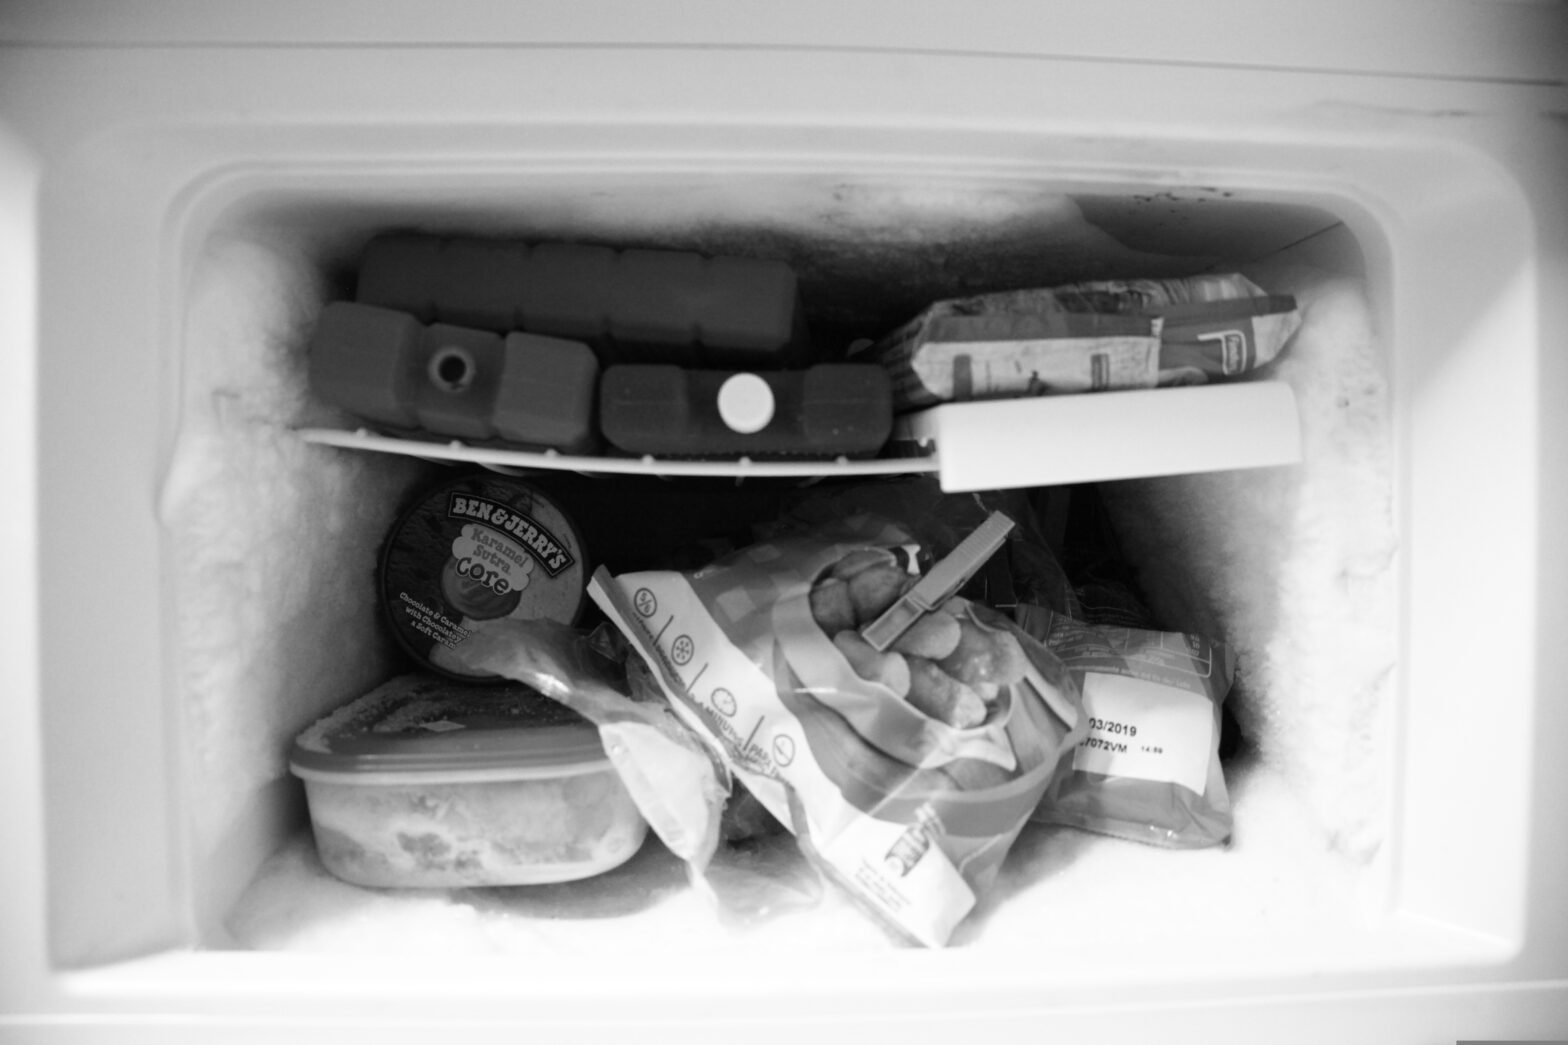 Freezer in need of defrosting, Image by Julio Pablo Vázquez